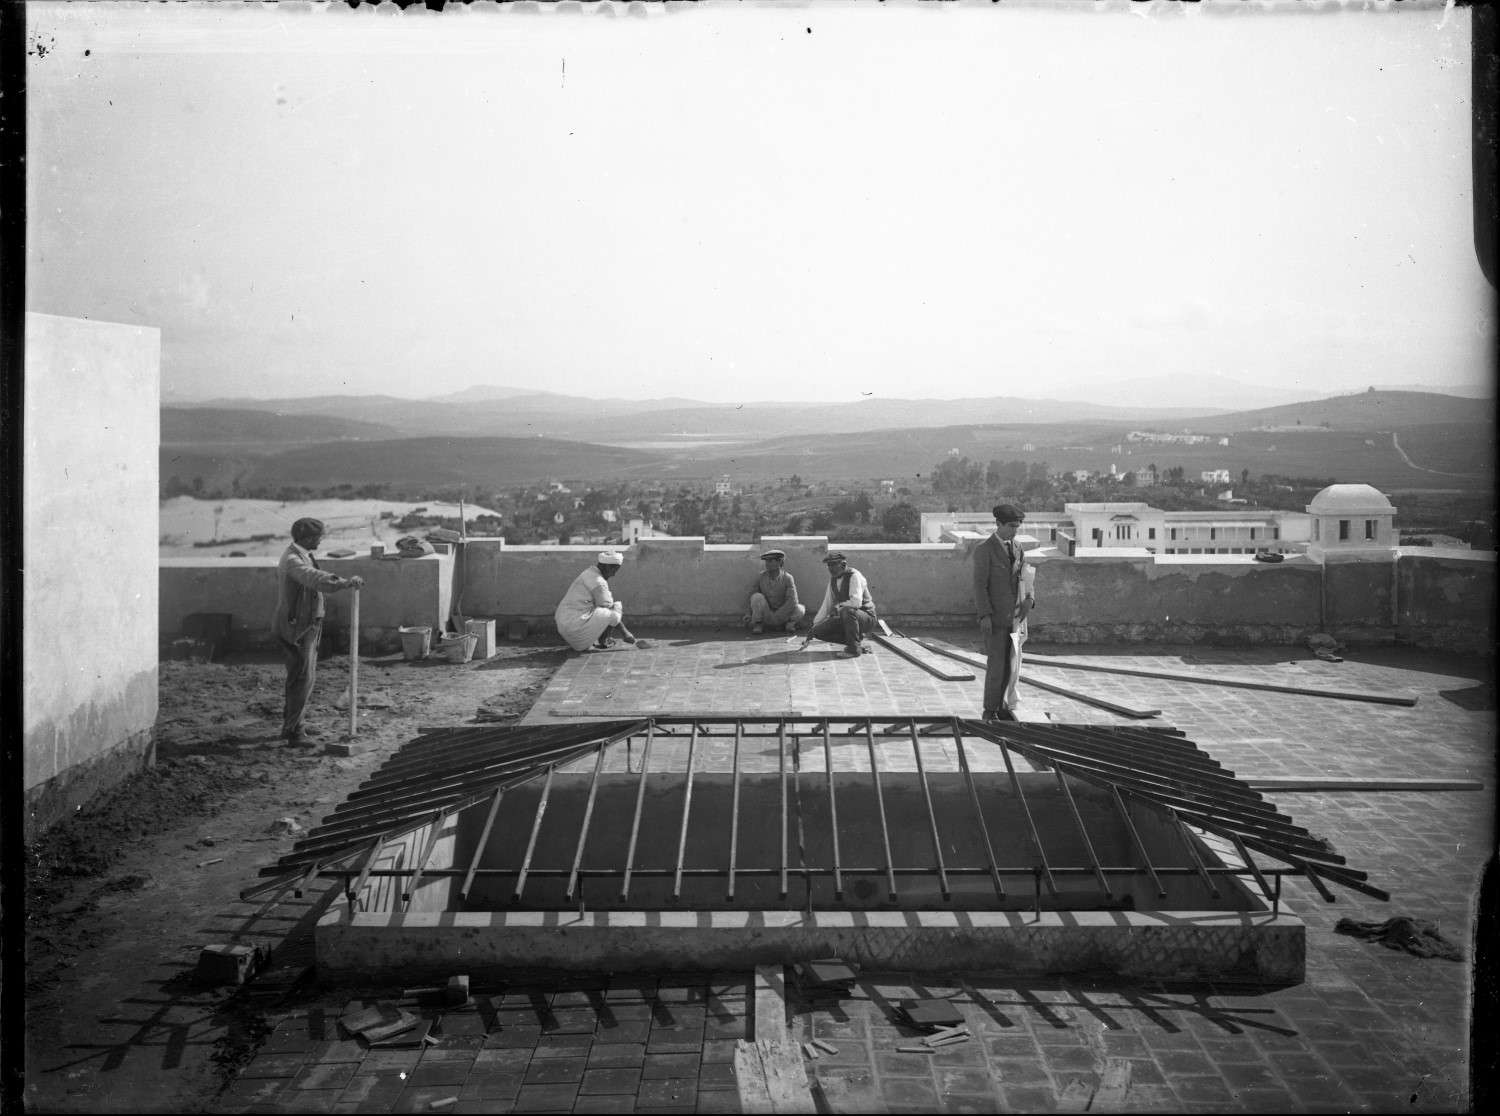 Construction on roof of 65 rue Foucauld, with mountains in background and workers in view.